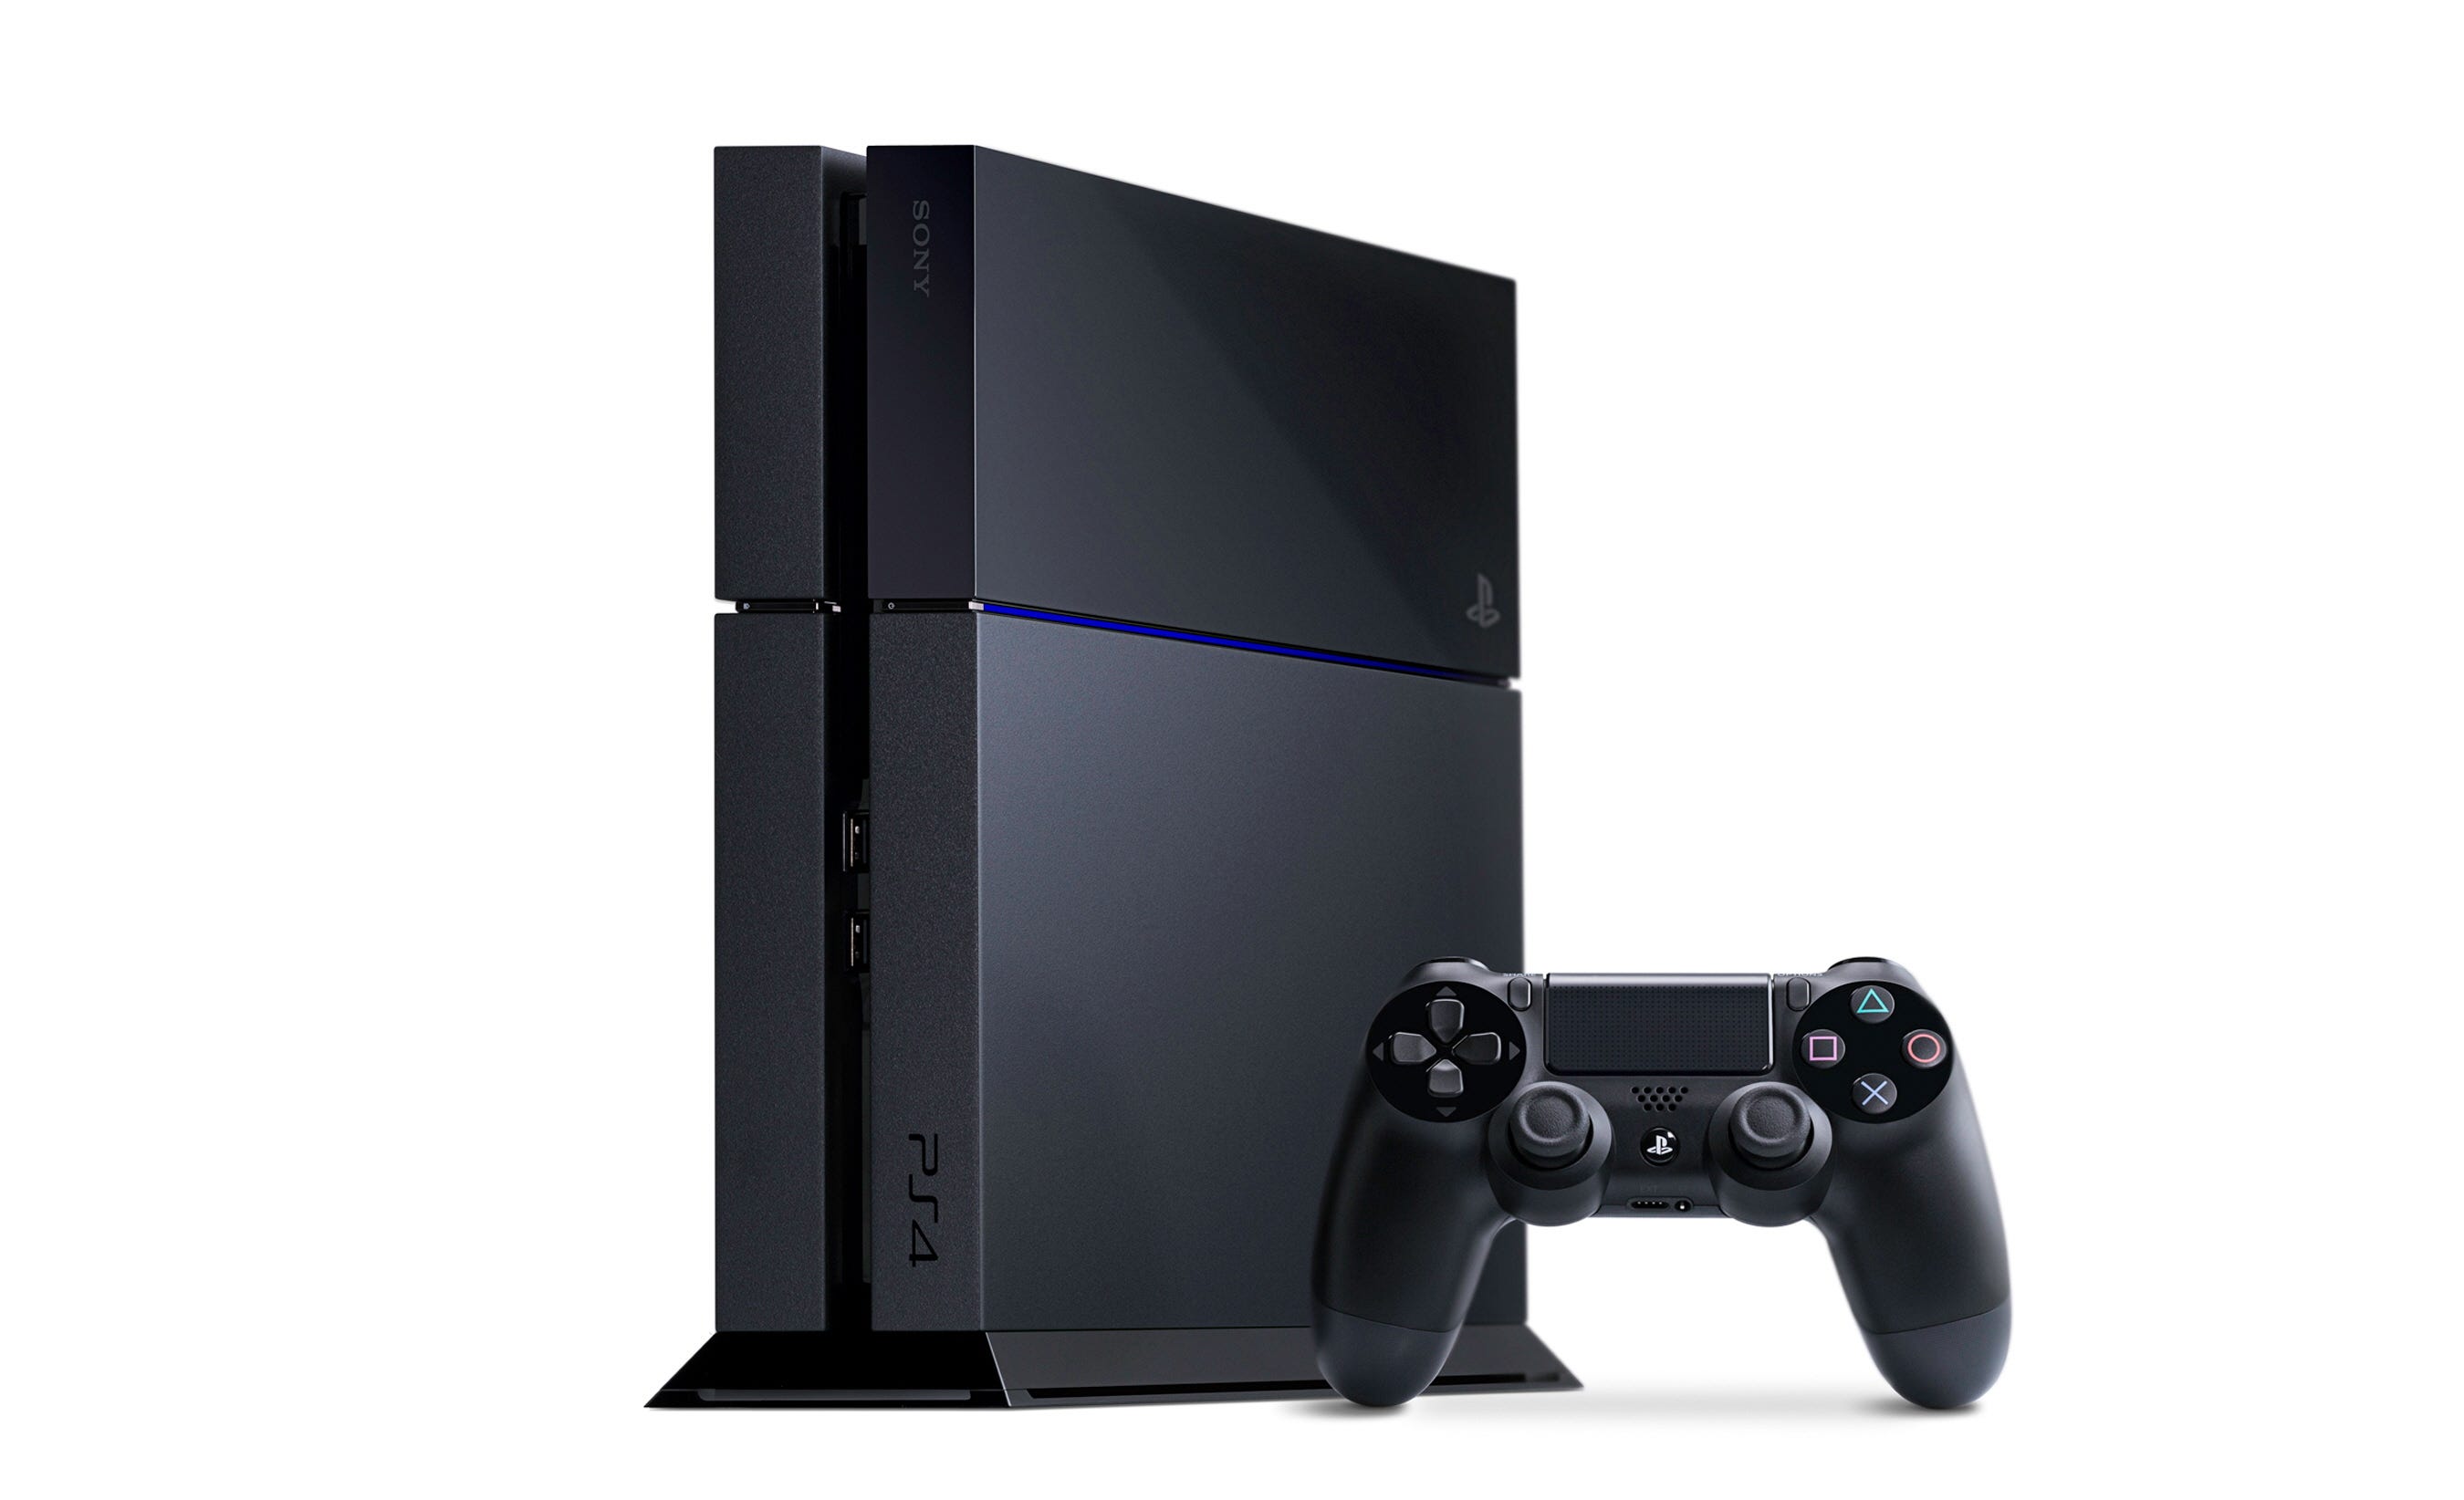 playstation 4 price release